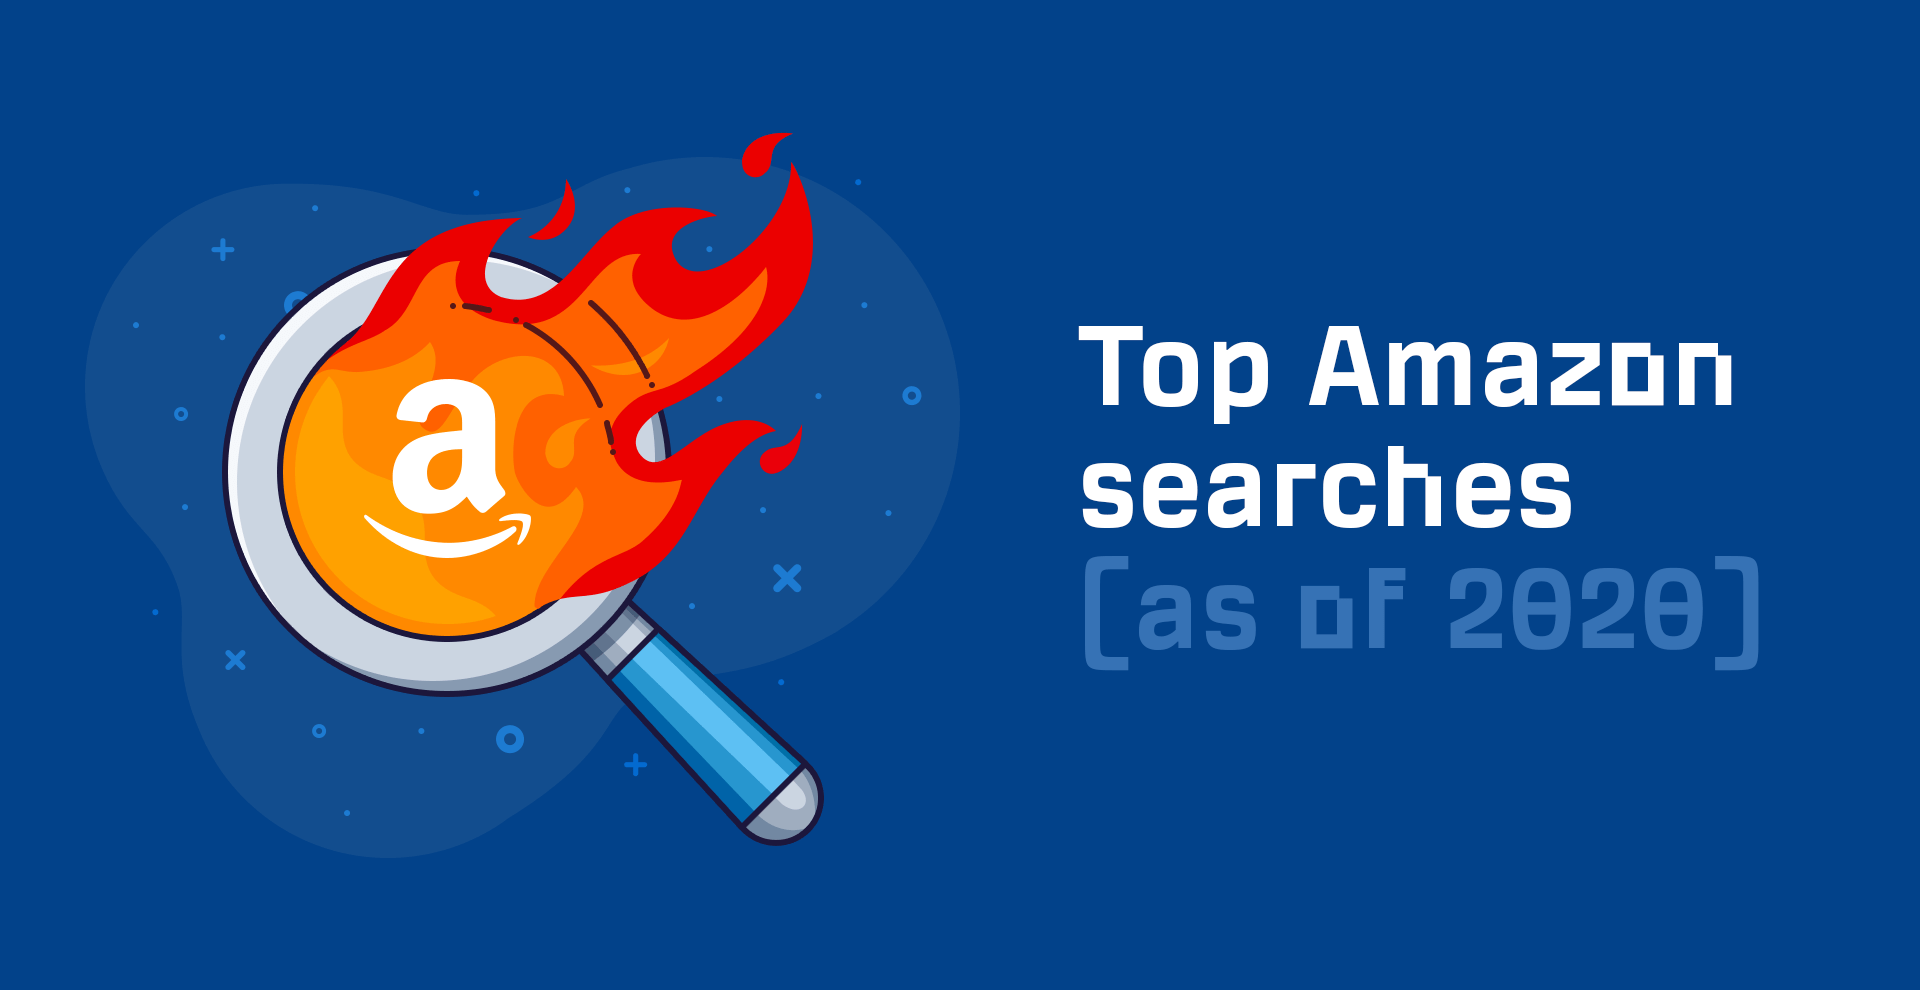 Top Searches on Amazon (as of 2020)